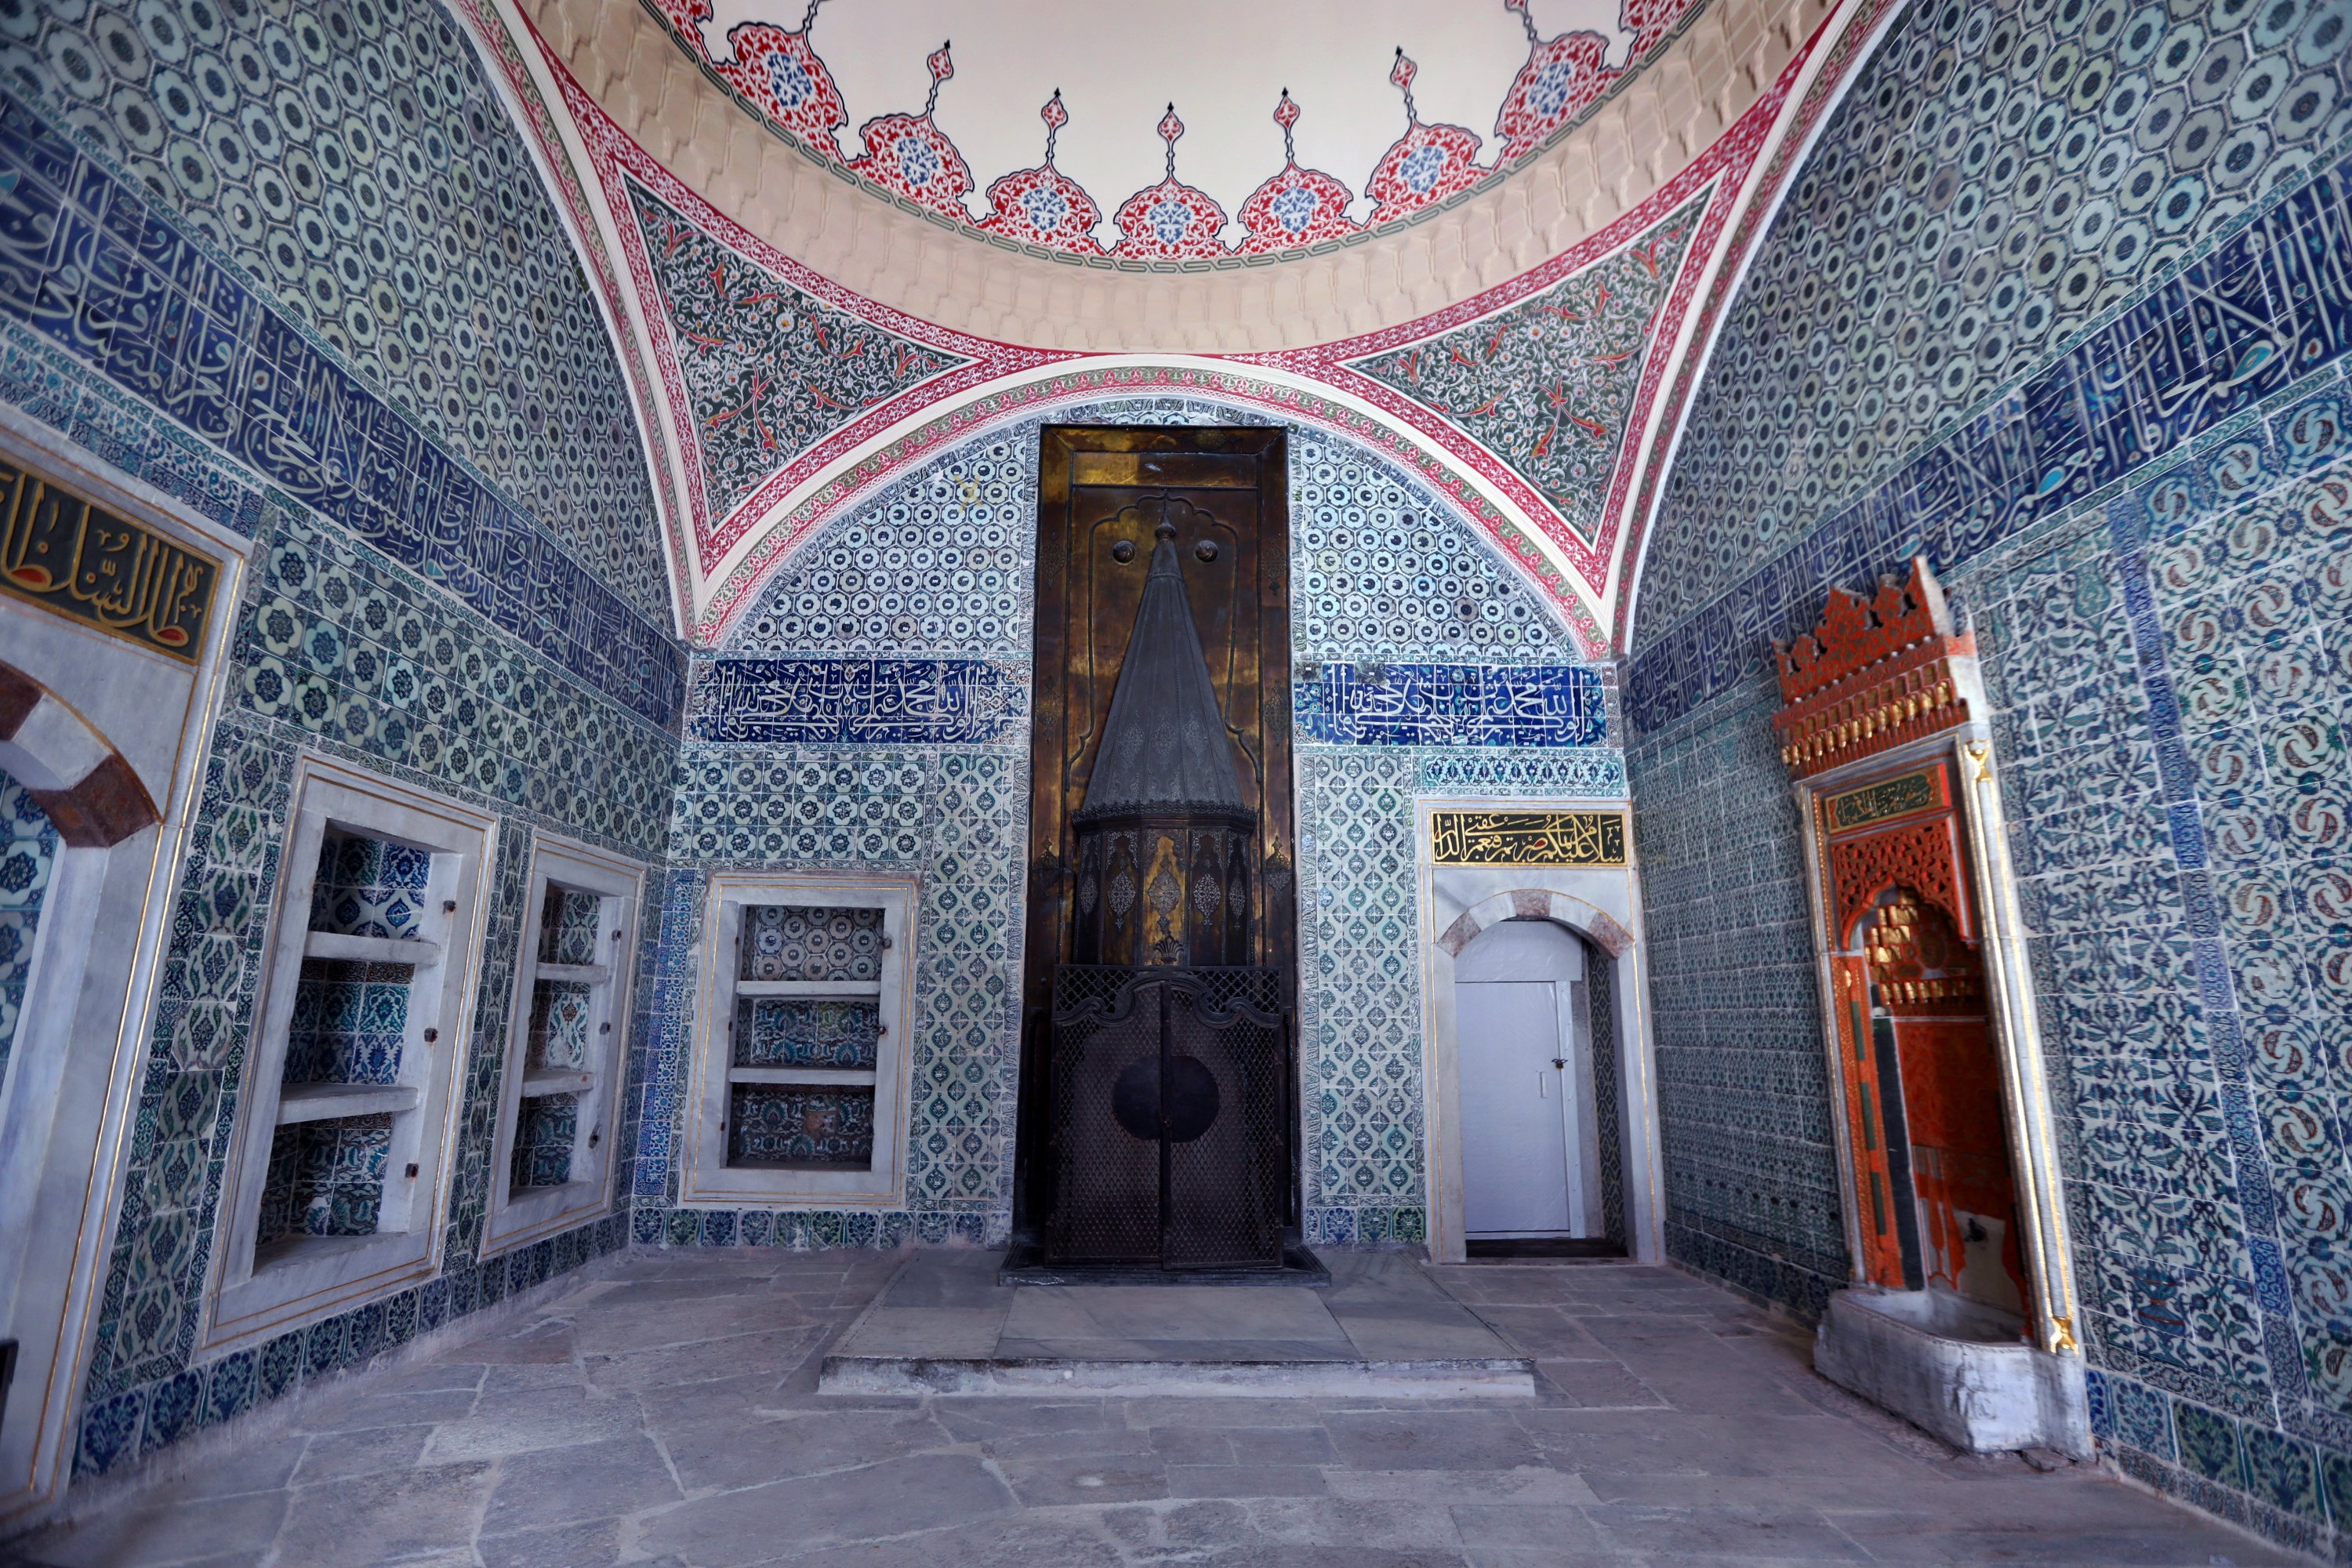 The Hall with a Fireplace houses the largest fireplace located in the harem, Topkapı Palace, Istanbul, Oct. 18, 2020. (AA PHOTO)